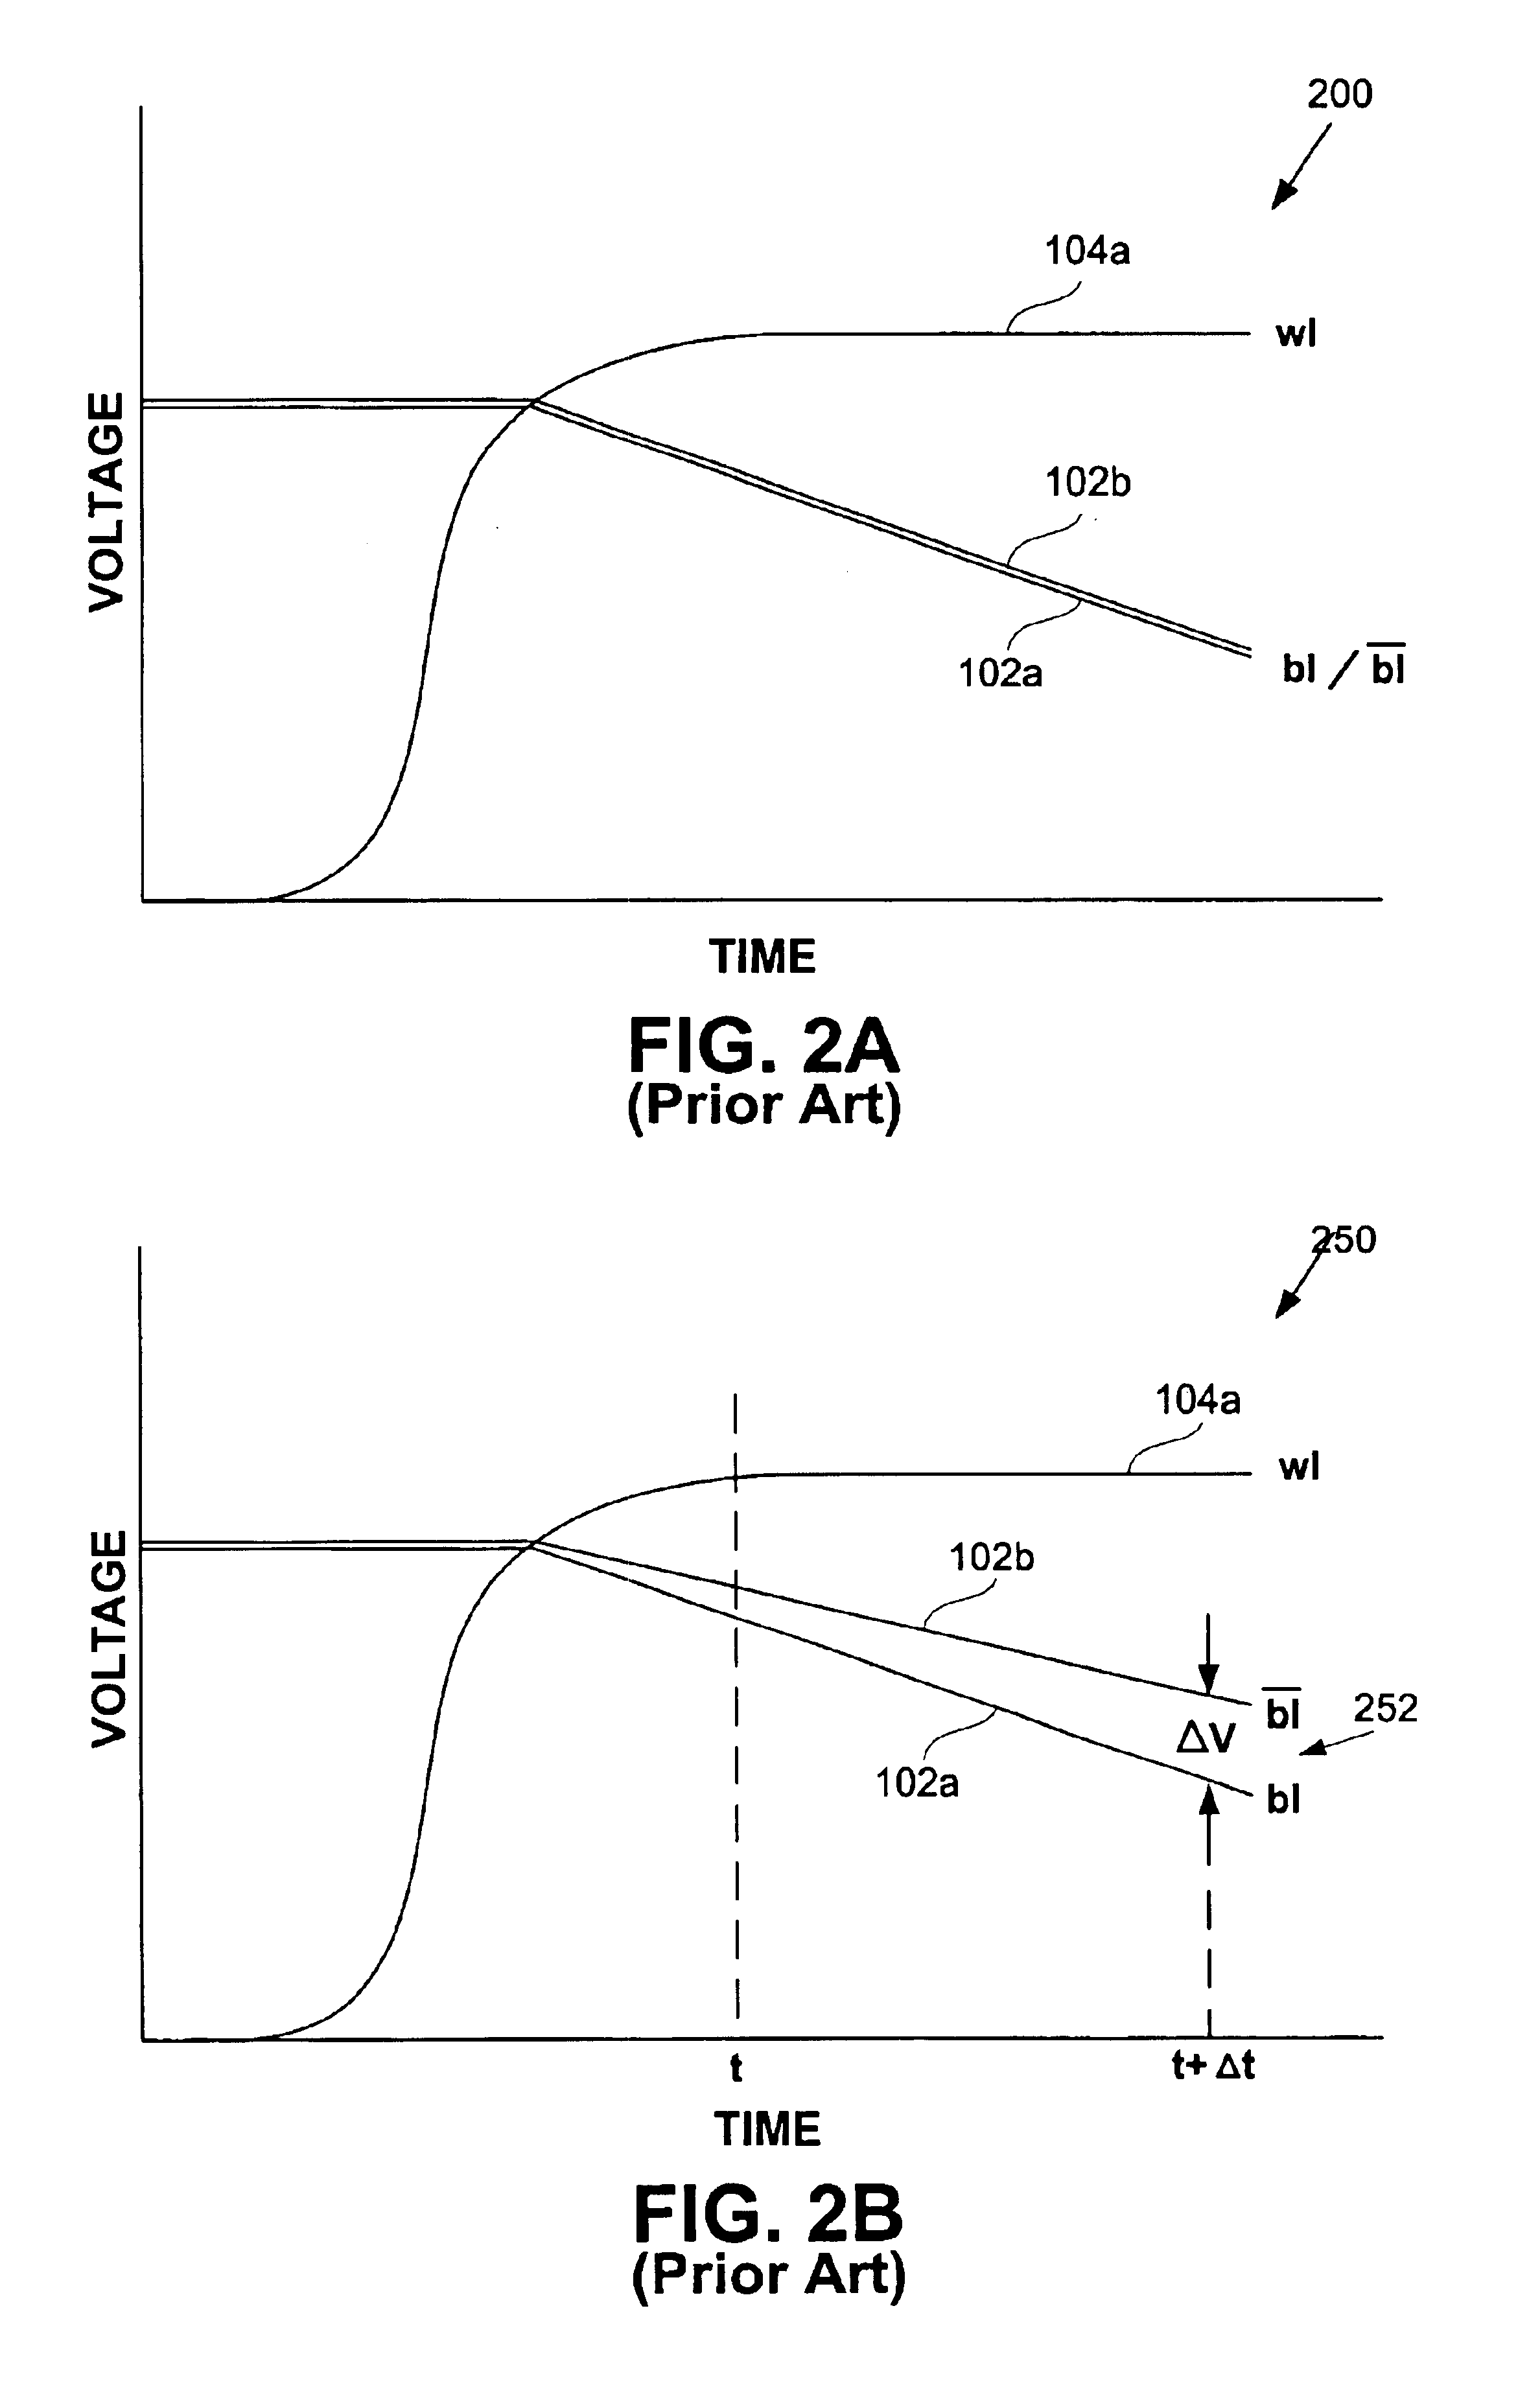 Negatively charged wordline for reduced subthreshold current